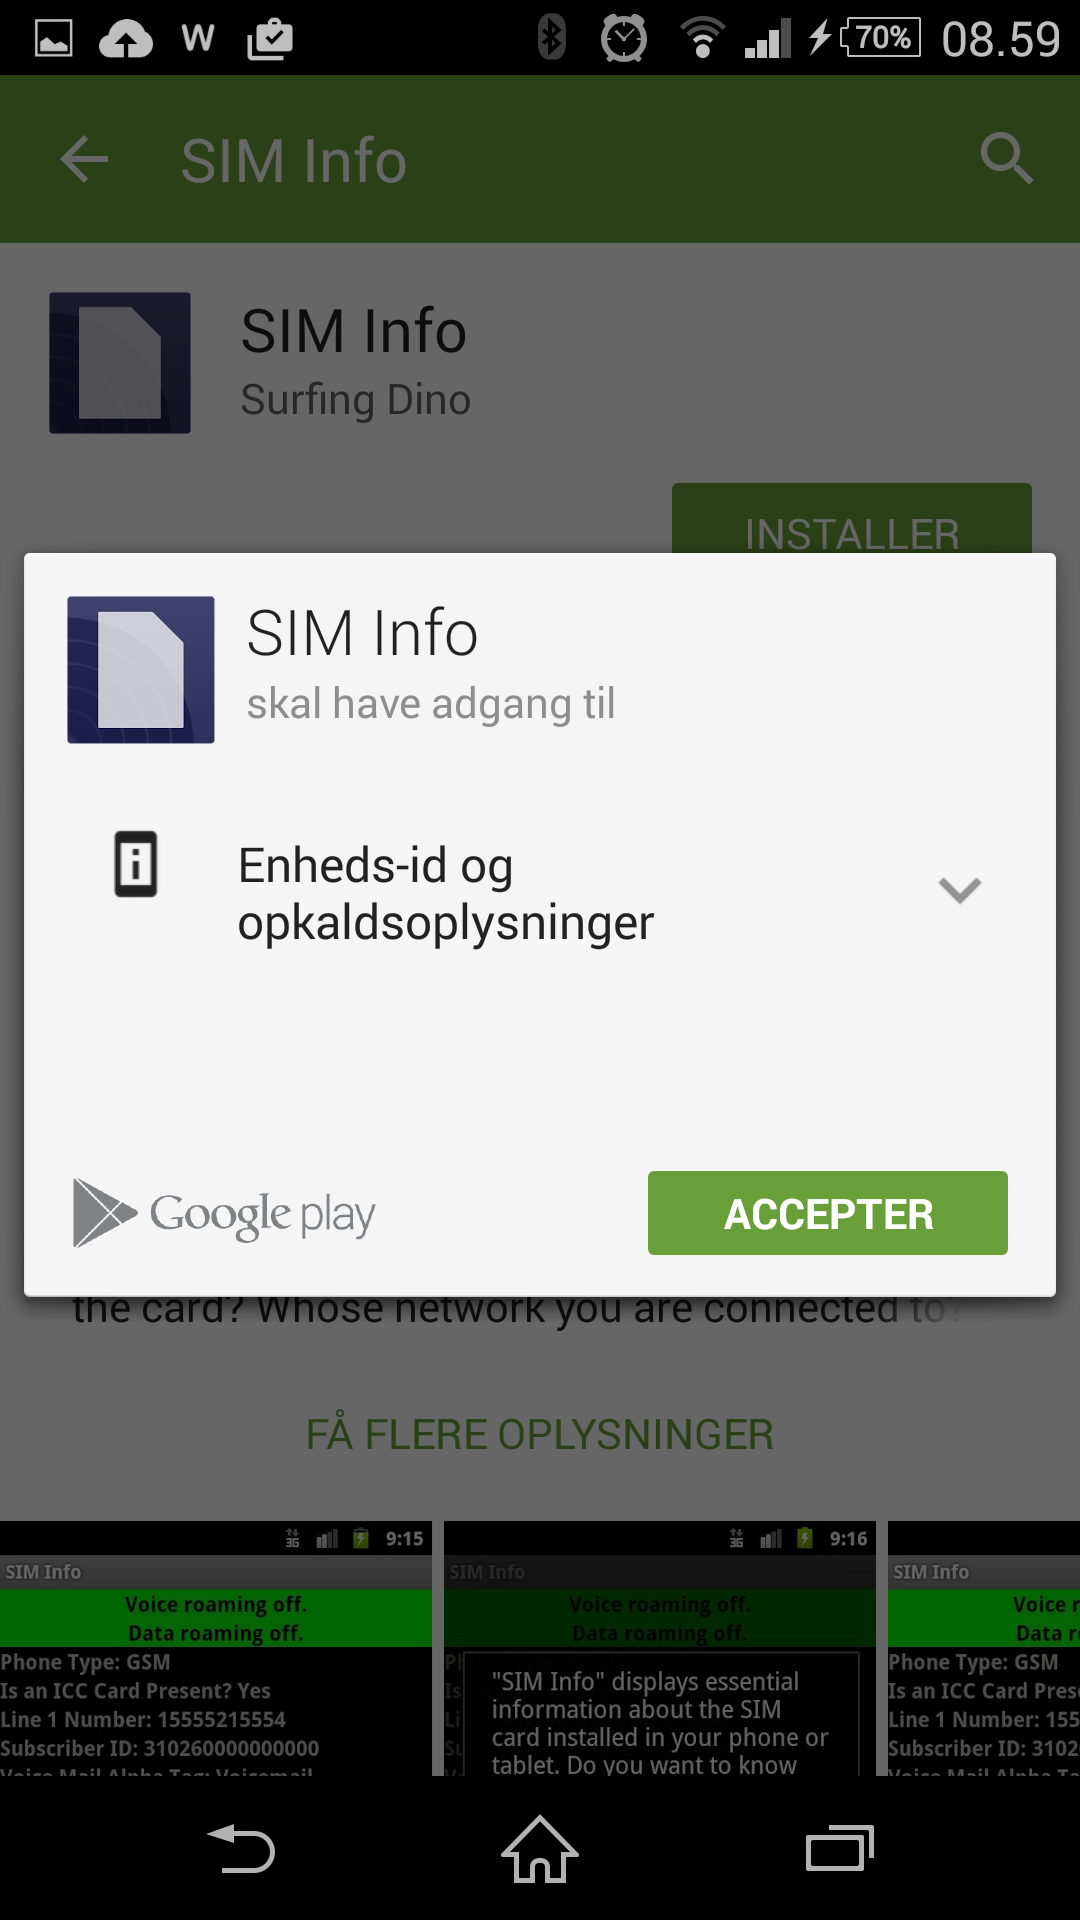 Accept, and the "SIM info". App is installing